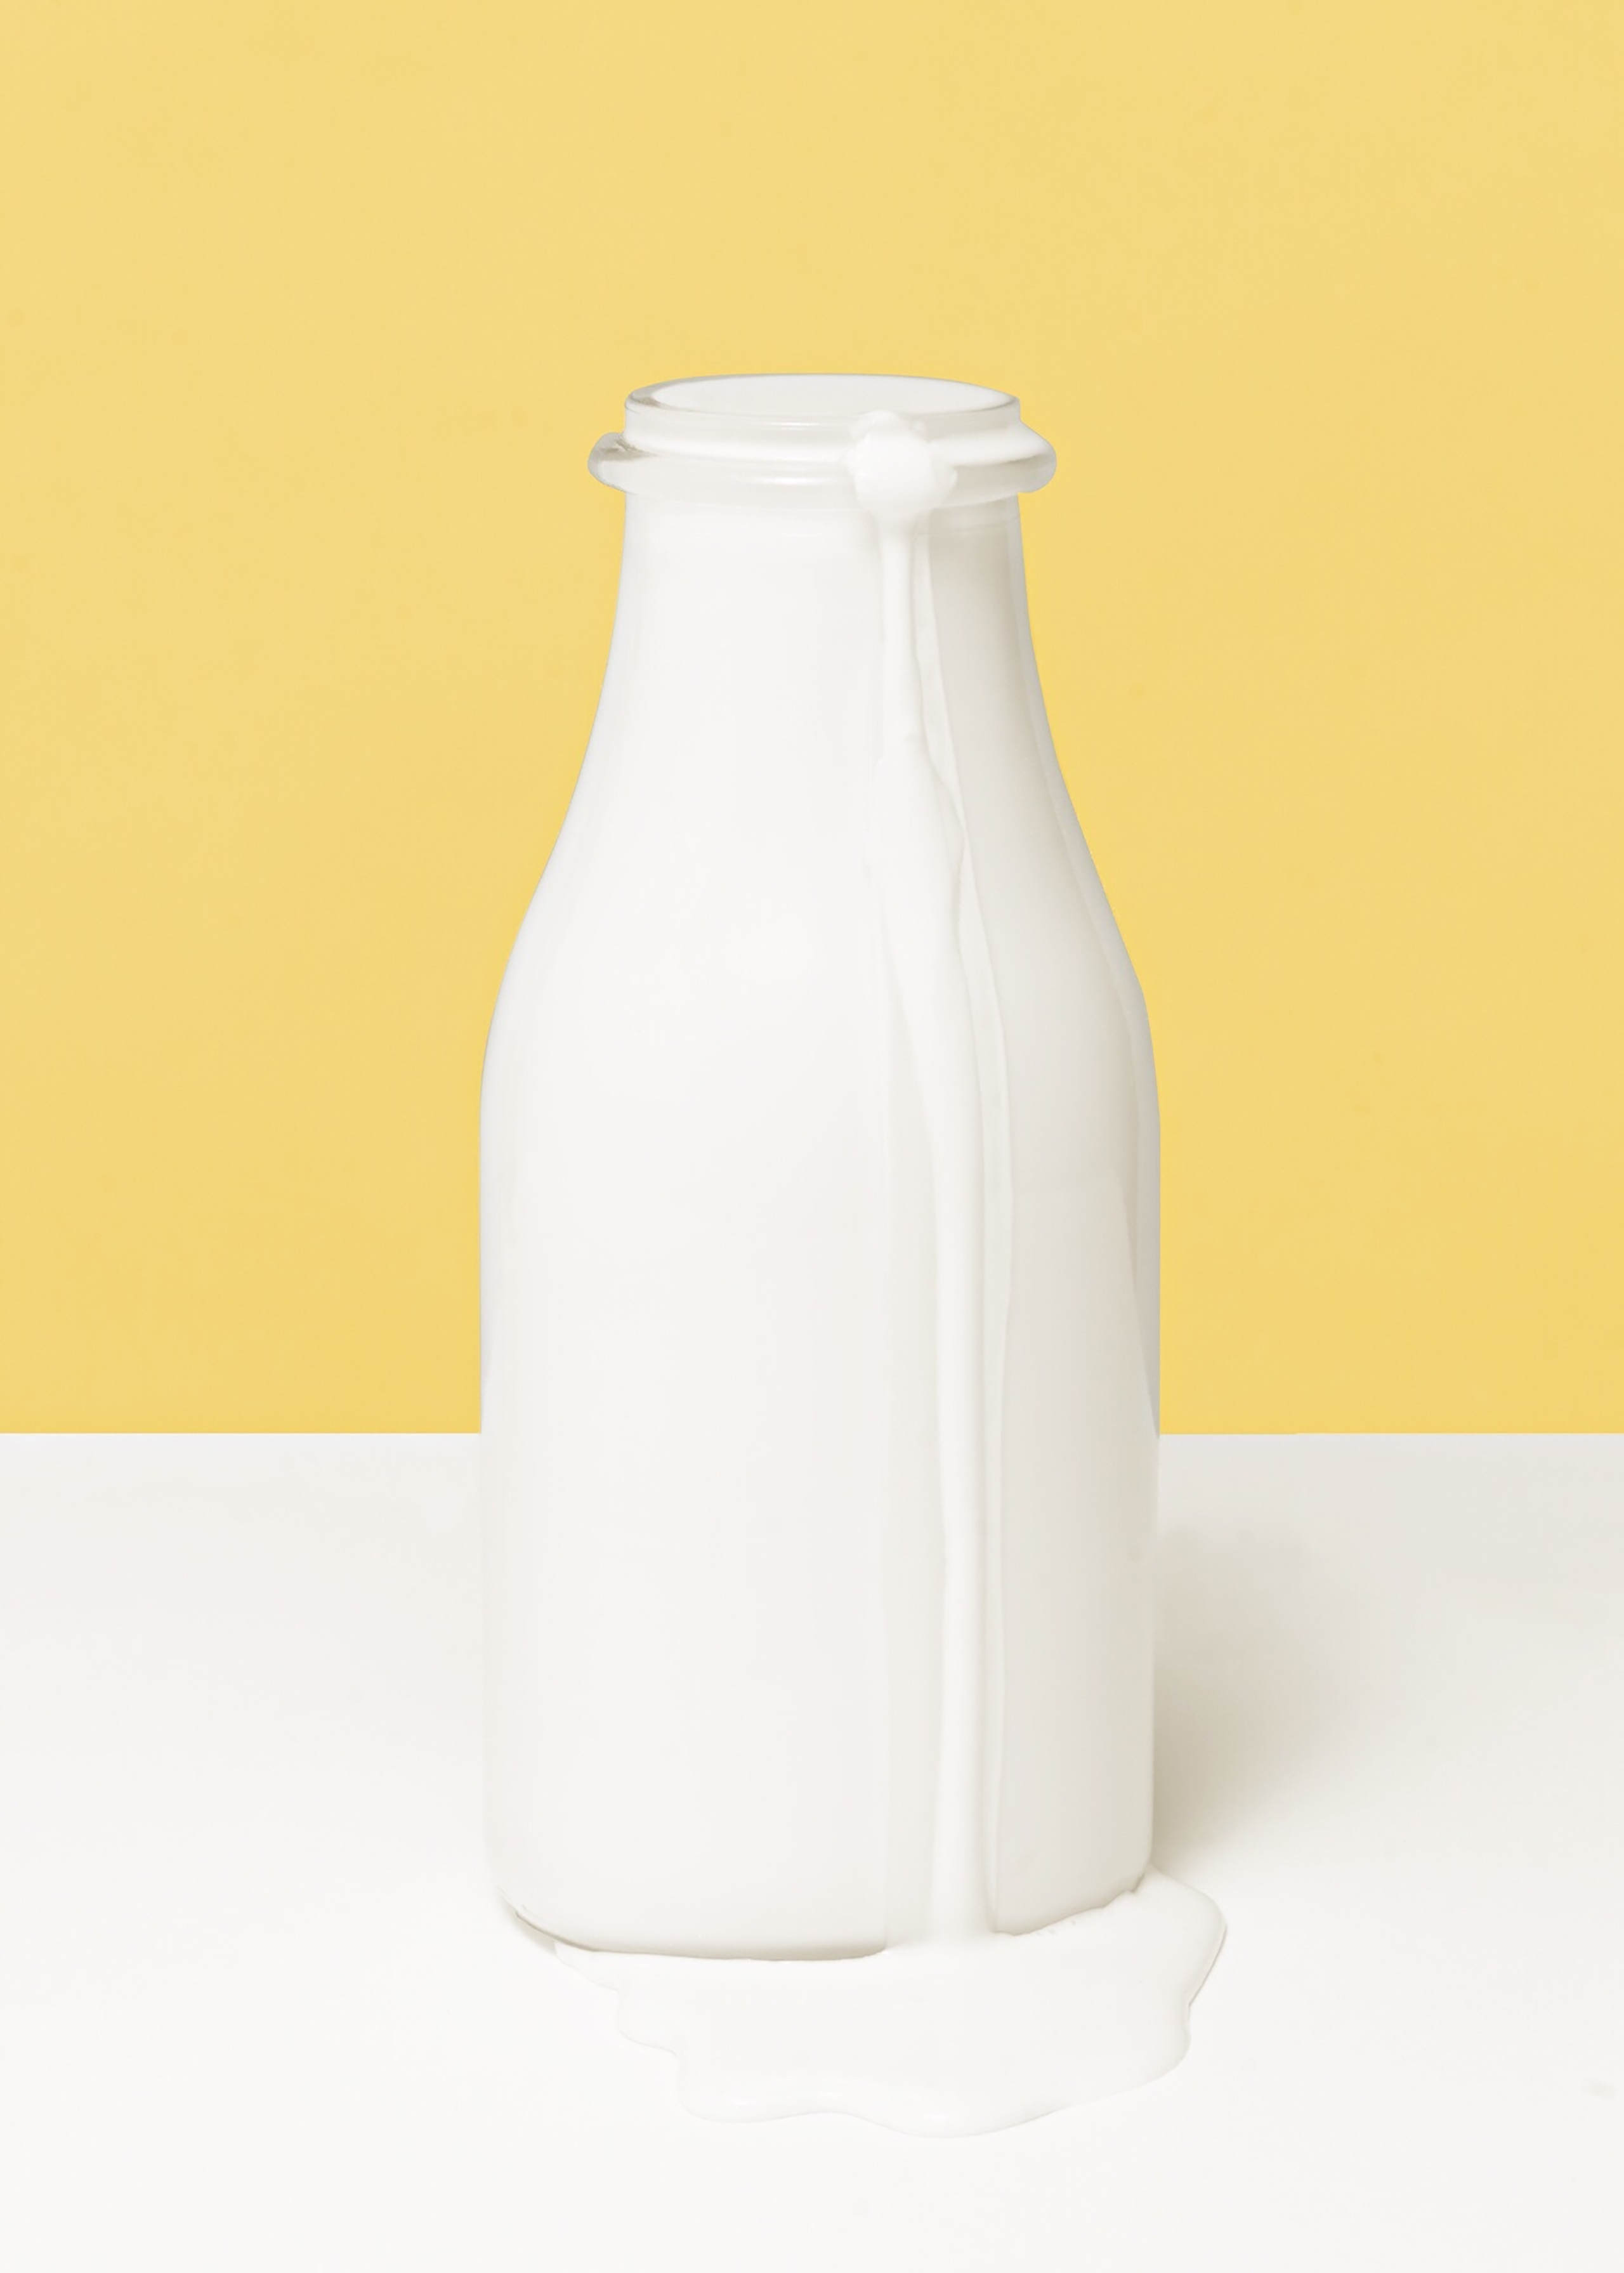 Close-Up Of Milk Bottle On Table